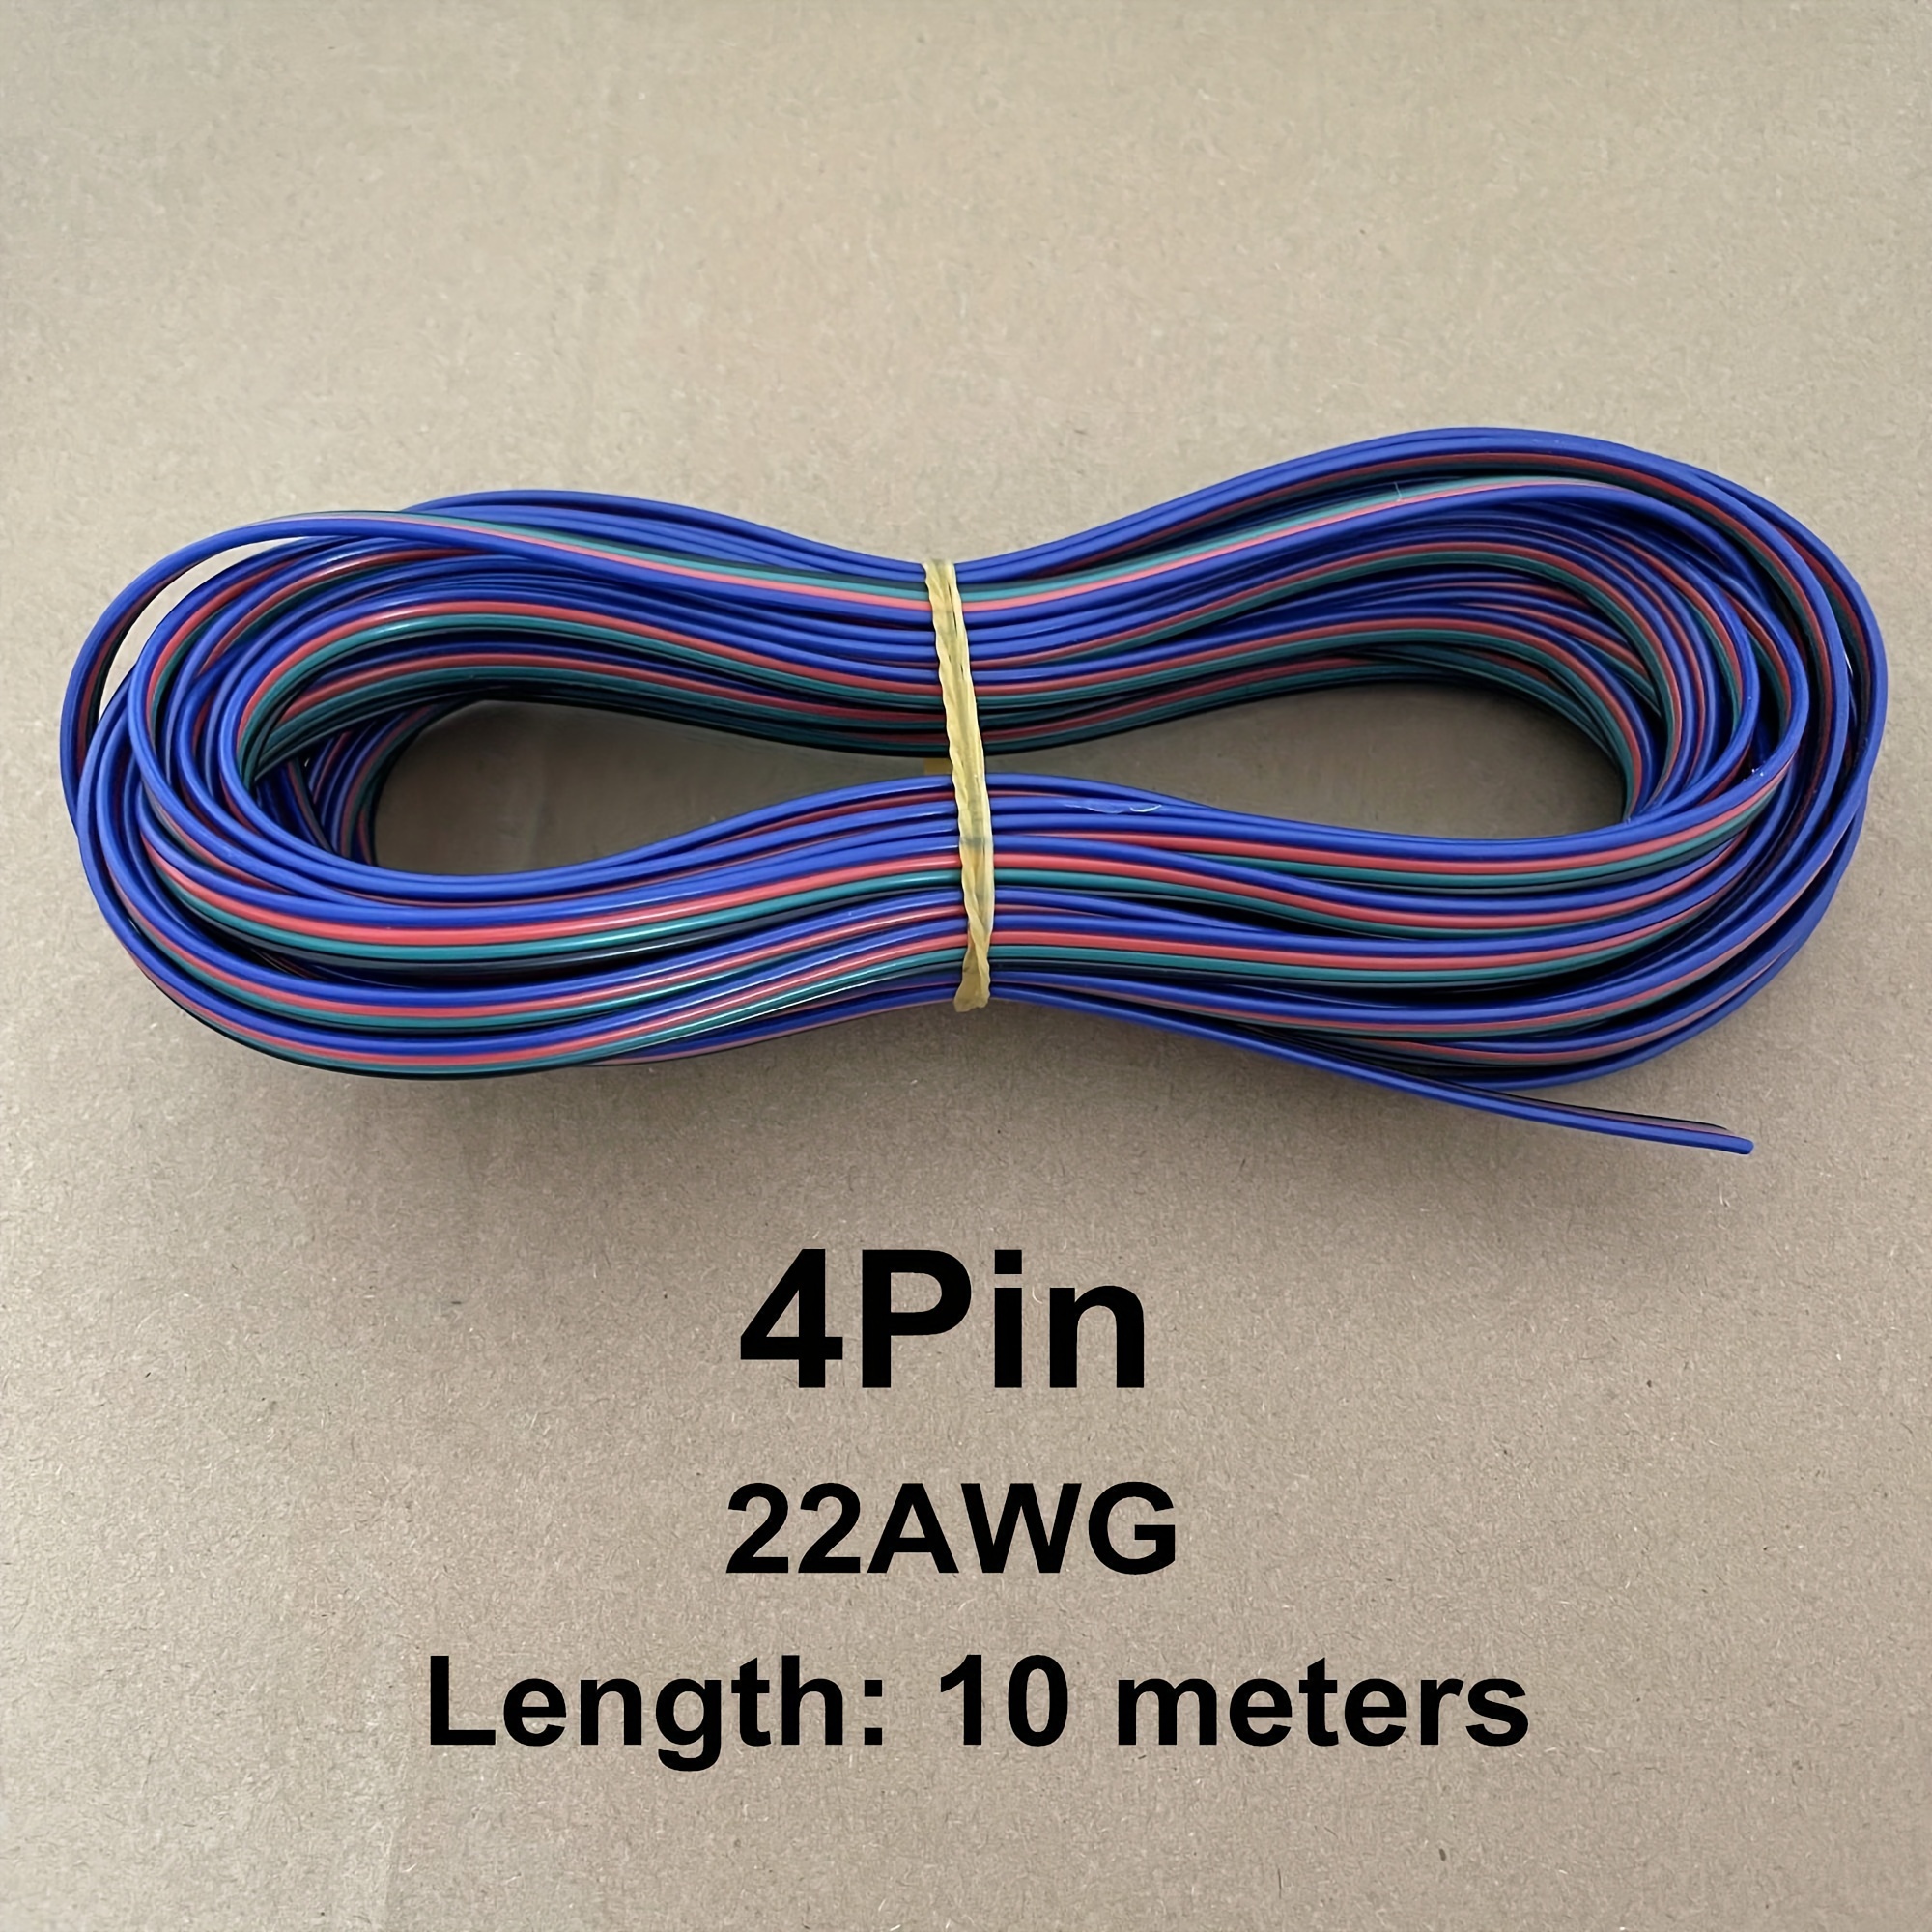 6 Pair RGBCCT LED Connection wire 22AWG